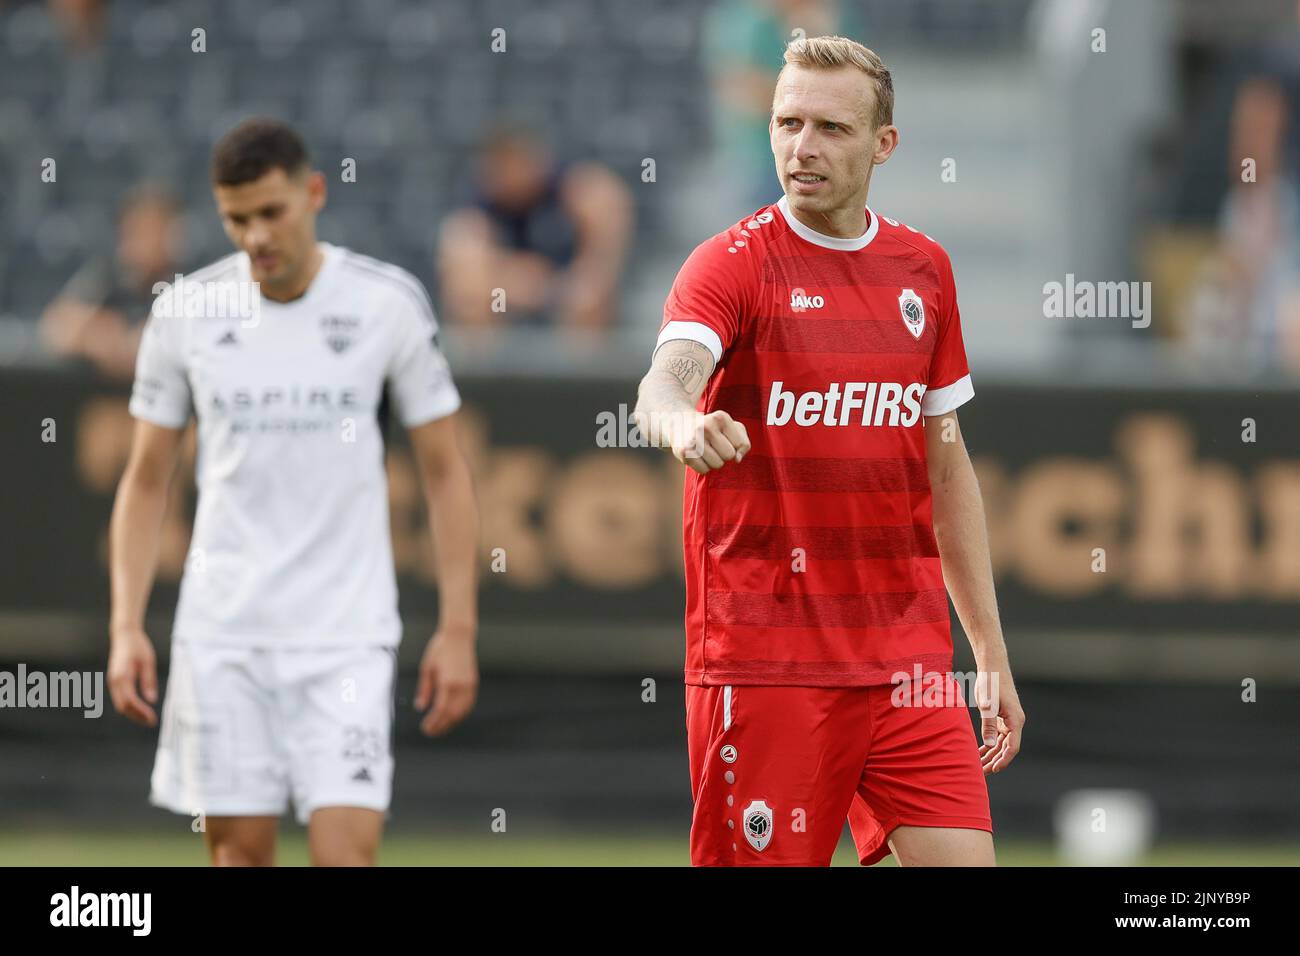 Antwerp's Ritchie De Laet celebrates after a soccer match between KAS Eupen and Royal Antwerp FC RAFC, Sunday 14 August 2022 in Eupen, on day 4 of the 2022-2023 'Jupiler Pro League' first division of the Belgian championship. BELGA PHOTO BRUNO FAHY Stock Photo